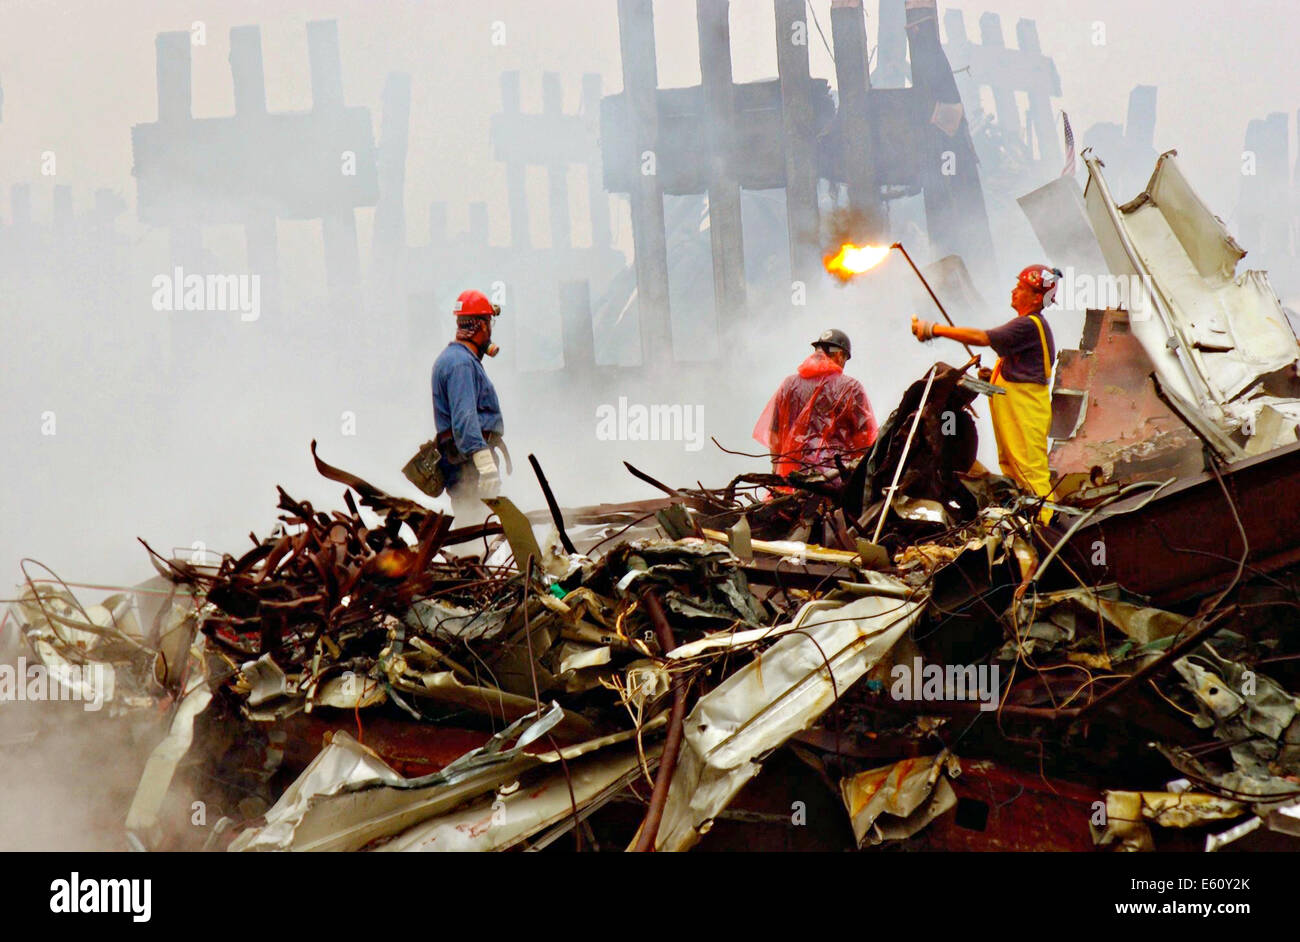 Rescue workers continue to remove debris cutting through massive steel beams amongst the wreckage of the World Trade Center in the aftermath of a massive terrorist attack which destroyed the twin towers killing 2,606 people September 20, 2001 in New York, NY. Stock Photo